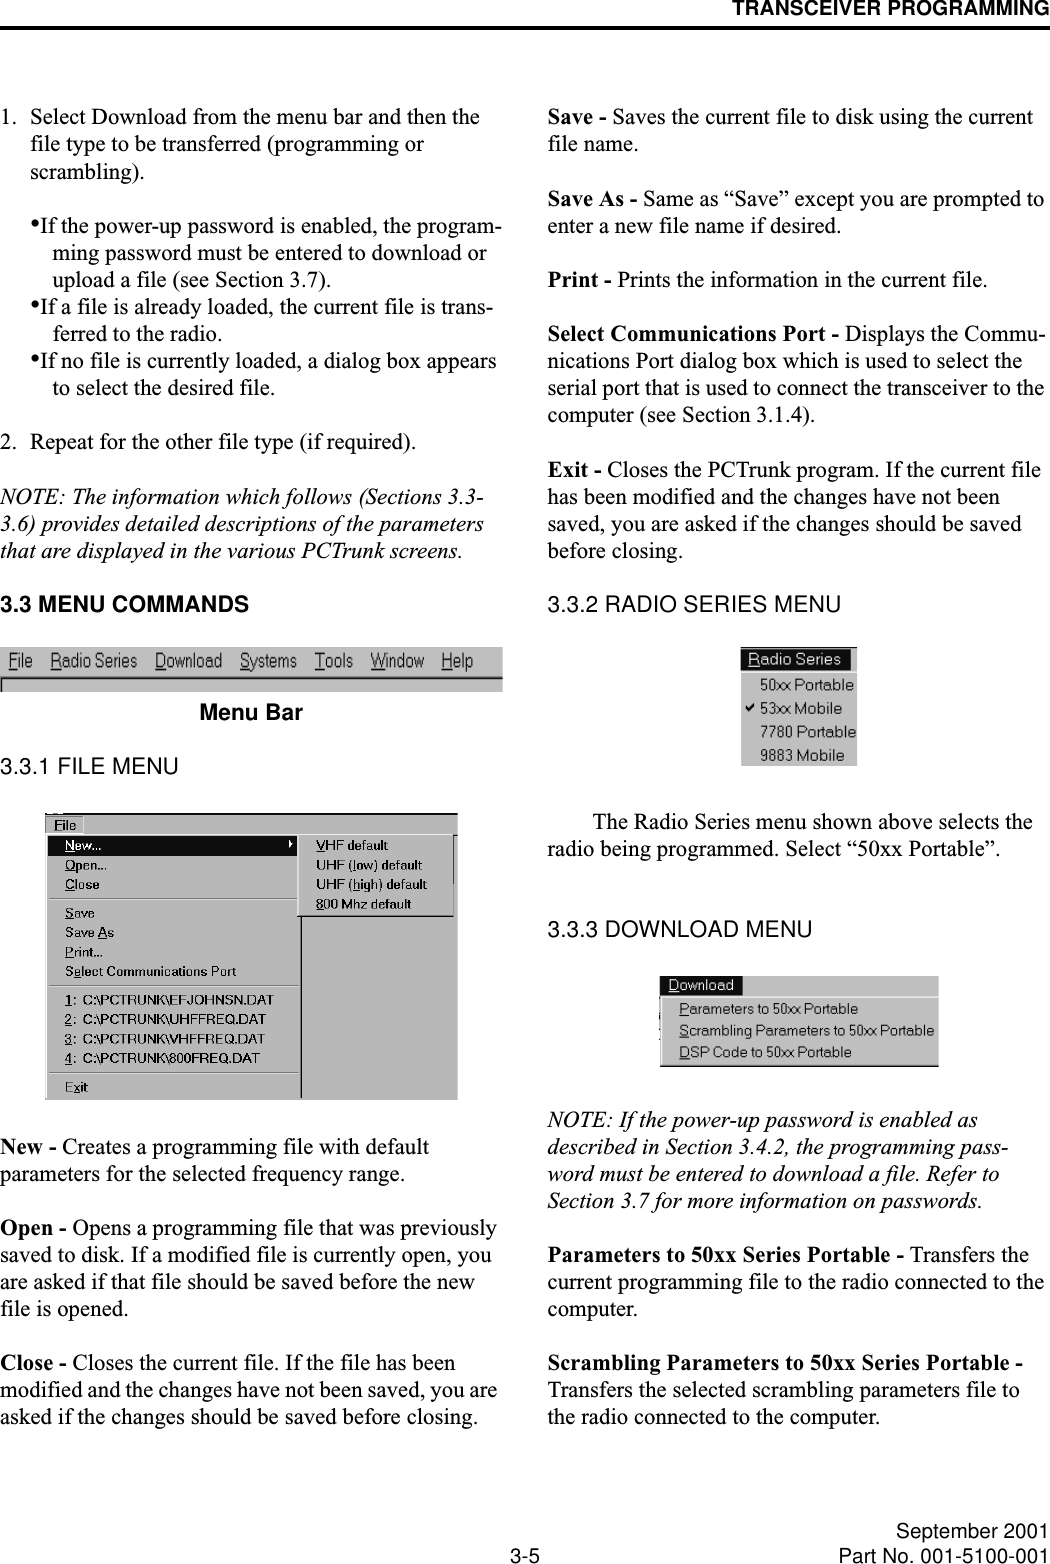 TRANSCEIVER PROGRAMMING3-5 September 2001Part No. 001-5100-0011. Select Download from the menu bar and then the file type to be transferred (programming or scrambling).•If the power-up password is enabled, the program-ming password must be entered to download or upload a file (see Section 3.7).•If a file is already loaded, the current file is trans-ferred to the radio.•If no file is currently loaded, a dialog box appears to select the desired file. 2. Repeat for the other file type (if required).NOTE: The information which follows (Sections 3.3- 3.6) provides detailed descriptions of the parameters that are displayed in the various PCTrunk screens.3.3 MENU COMMANDSMenu Bar3.3.1 FILE MENUNew - Creates a programming file with default parameters for the selected frequency range.Open - Opens a programming file that was previously saved to disk. If a modified file is currently open, you are asked if that file should be saved before the new file is opened.Close - Closes the current file. If the file has been modified and the changes have not been saved, you are asked if the changes should be saved before closing.Save - Saves the current file to disk using the current file name.Save As - Same as “Save” except you are prompted to enter a new file name if desired.Print - Prints the information in the current file. Select Communications Port - Displays the Commu-nications Port dialog box which is used to select the serial port that is used to connect the transceiver to the computer (see Section 3.1.4).Exit - Closes the PCTrunk program. If the current file has been modified and the changes have not been saved, you are asked if the changes should be saved before closing.3.3.2 RADIO SERIES MENUThe Radio Series menu shown above selects the radio being programmed. Select “50xx Portable”.3.3.3 DOWNLOAD MENUNOTE: If the power-up password is enabled as described in Section 3.4.2, the programming pass-word must be entered to download a file. Refer to Section 3.7 for more information on passwords.Parameters to 50xx Series Portable - Transfers the current programming file to the radio connected to the computer. Scrambling Parameters to 50xx Series Portable - Transfers the selected scrambling parameters file to the radio connected to the computer.